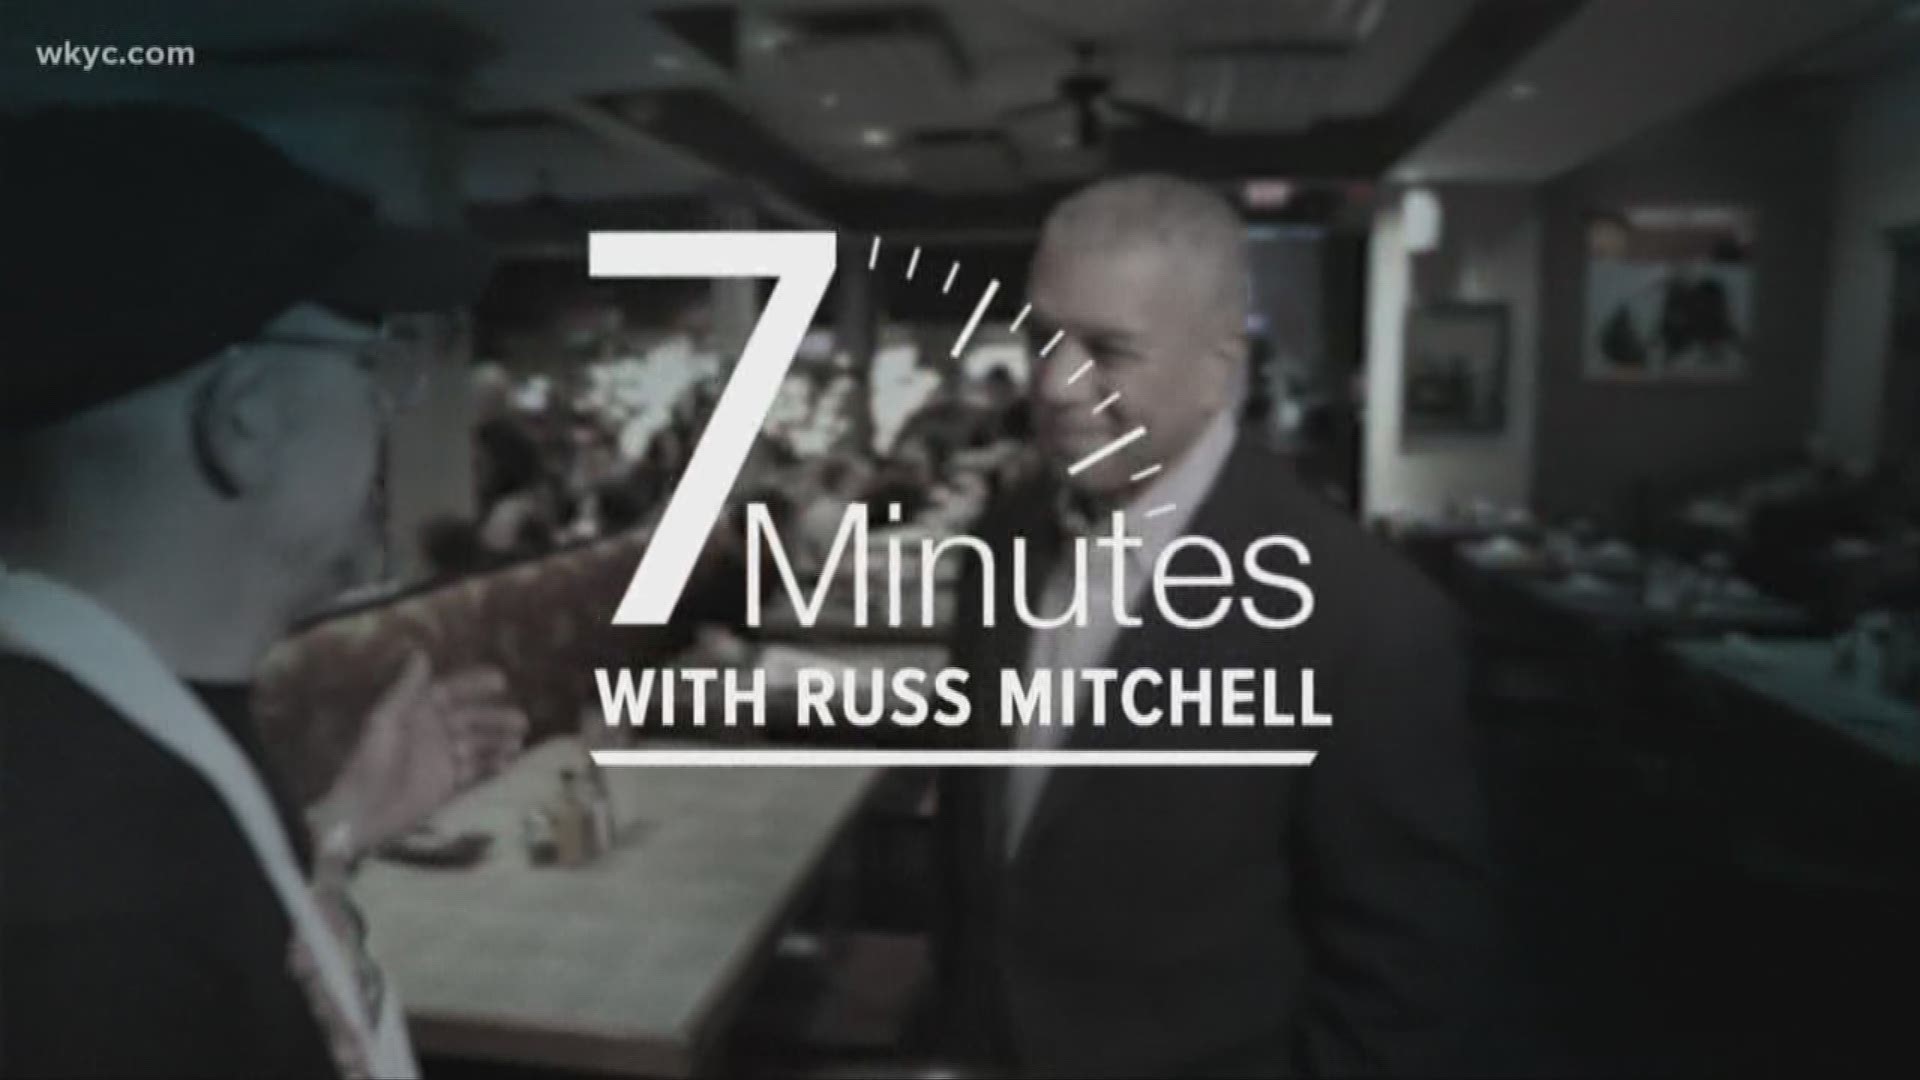 On this episode of 7 minutes, WKYC's Russ Mitchell sits down with retiring PNC executive, Paul Clark.